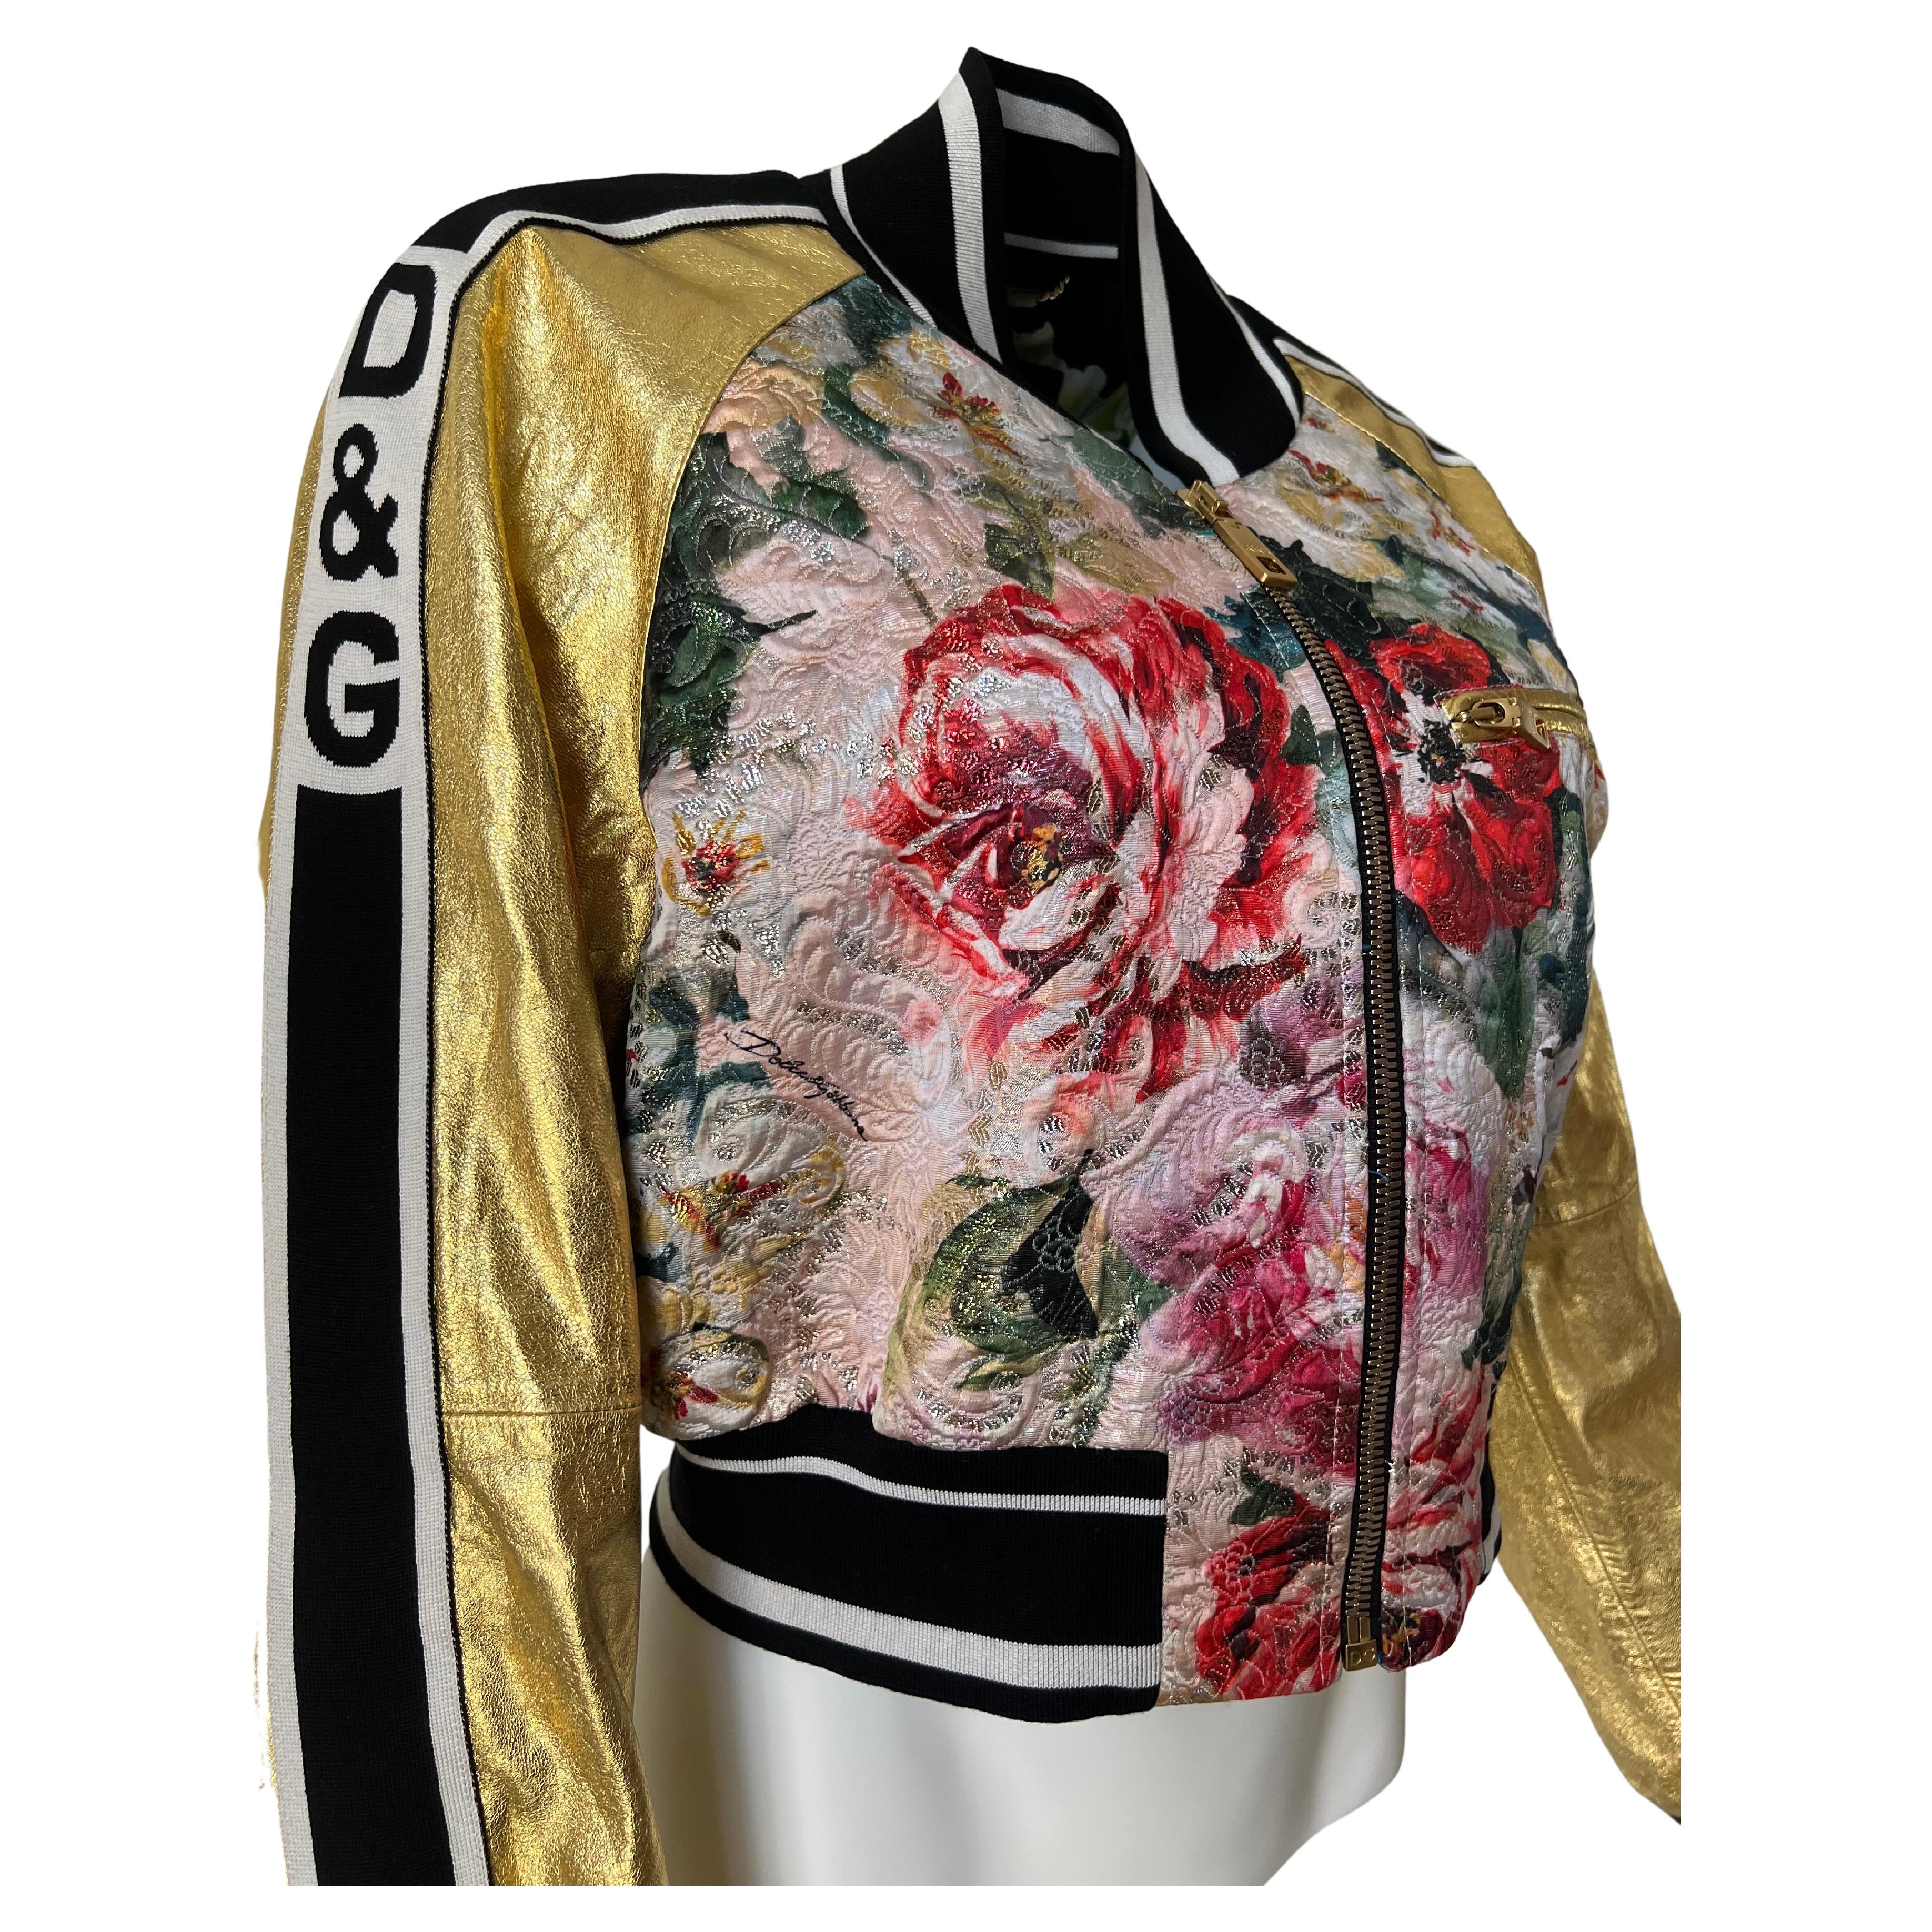 Beautiful cropped leather Dolce & Gabbana jacket. Floral lined with blue foiled leather. Outside is a beautiful semi foiled floral brocade with gold foiled leather sleeves and blue foil leather back. Detailed D&G zipper and piping. Made in Italy. 